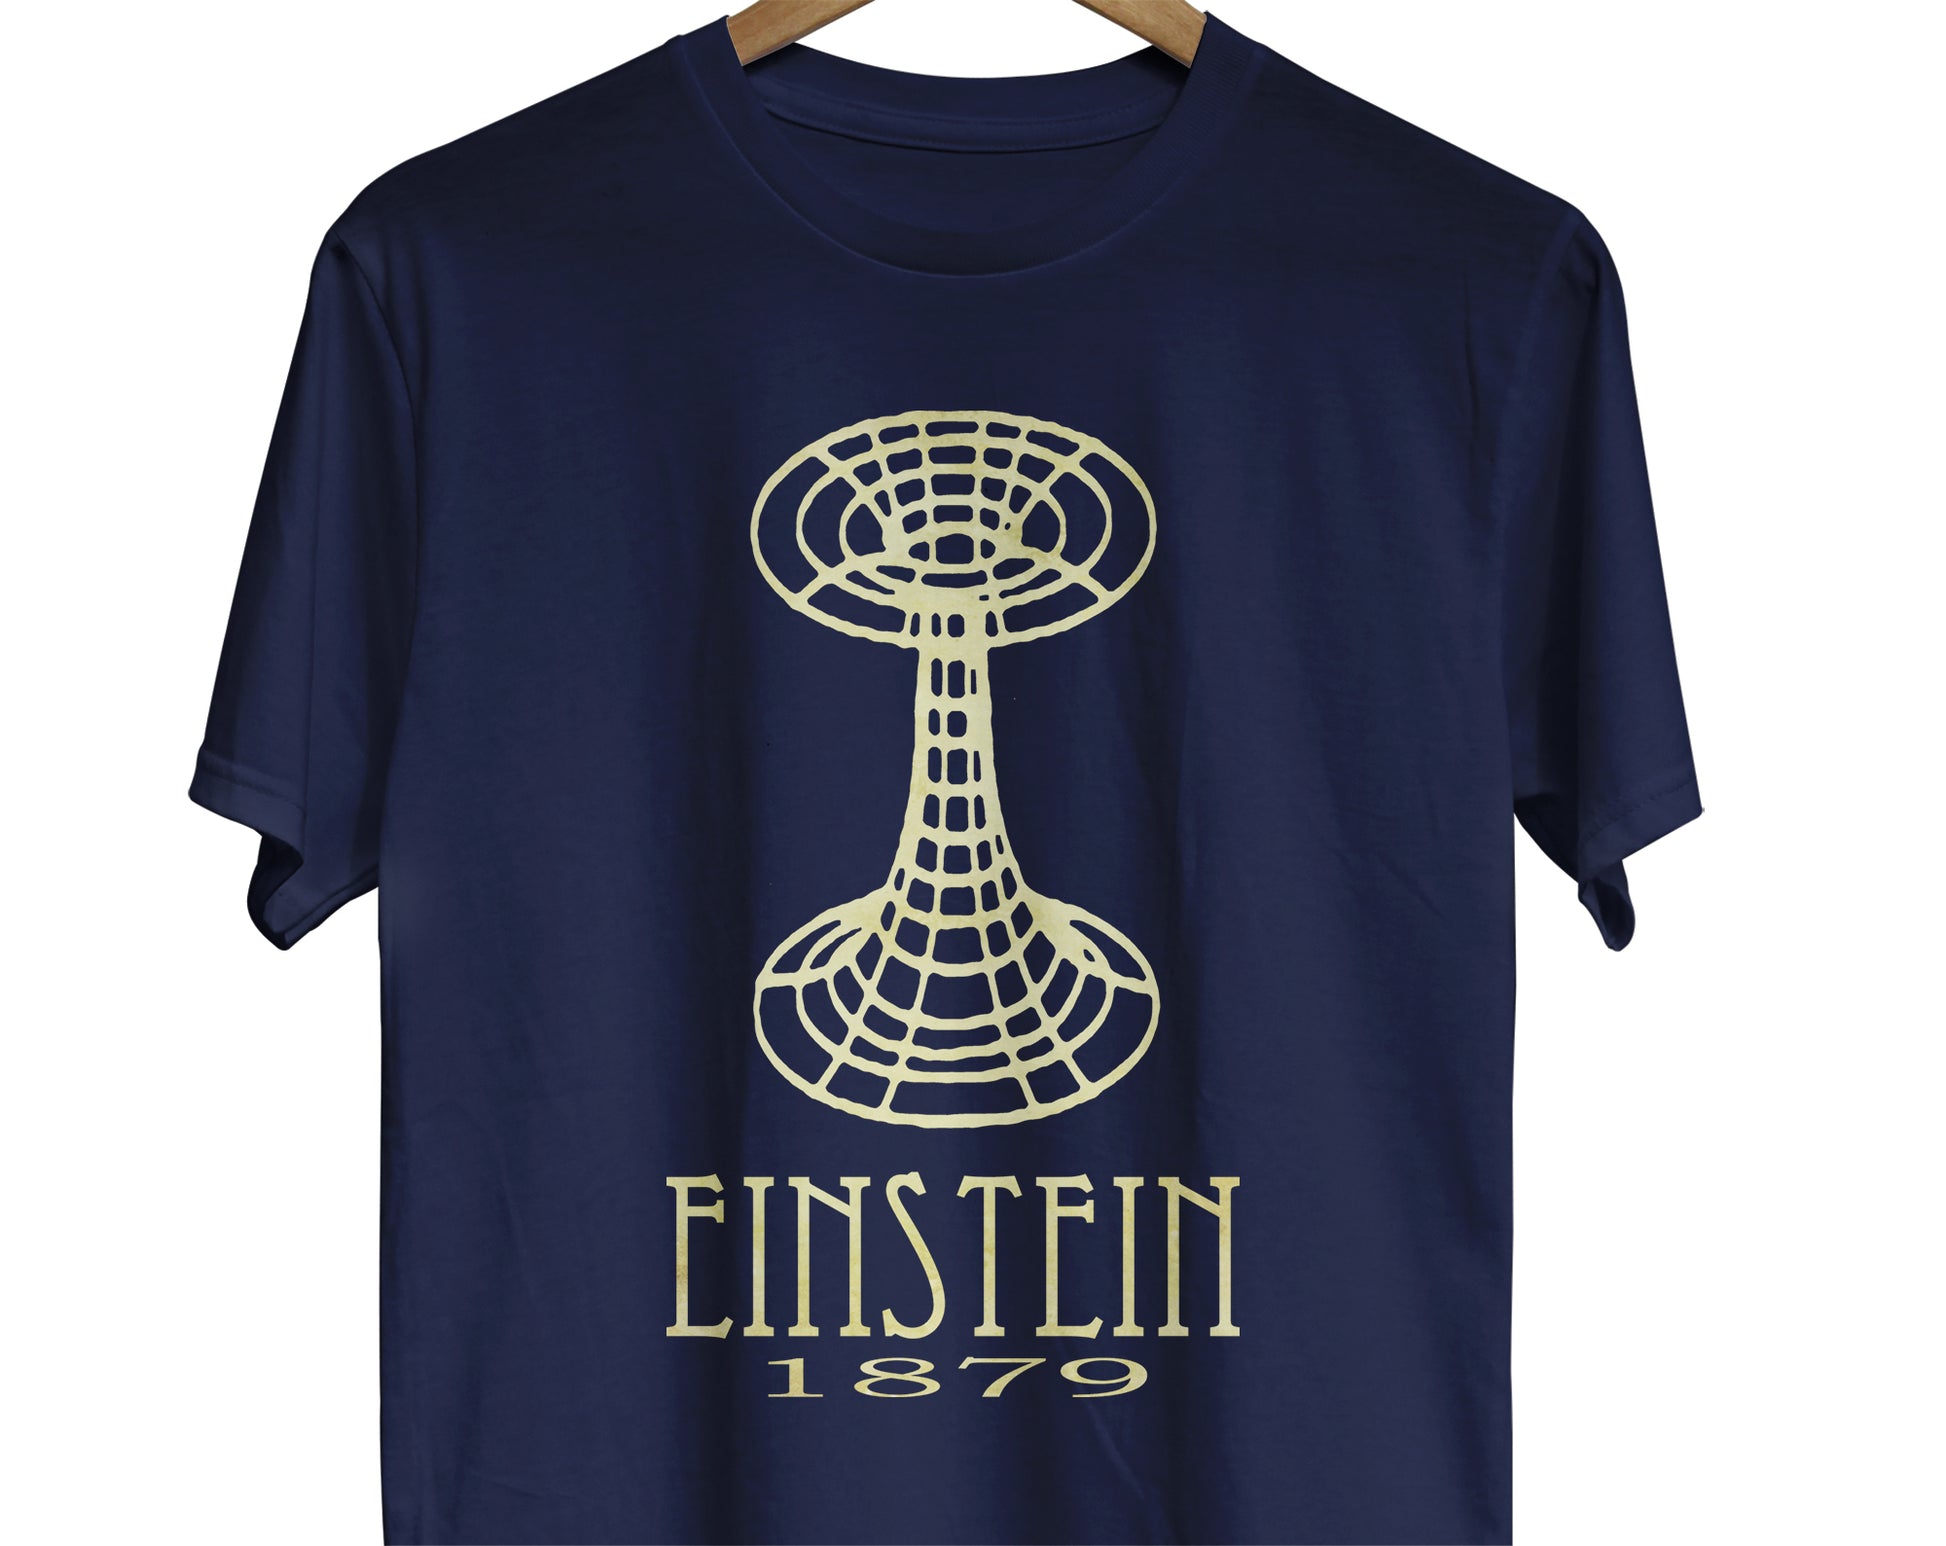 Einstein physics t-shirt with wormhole graphic for science teacher